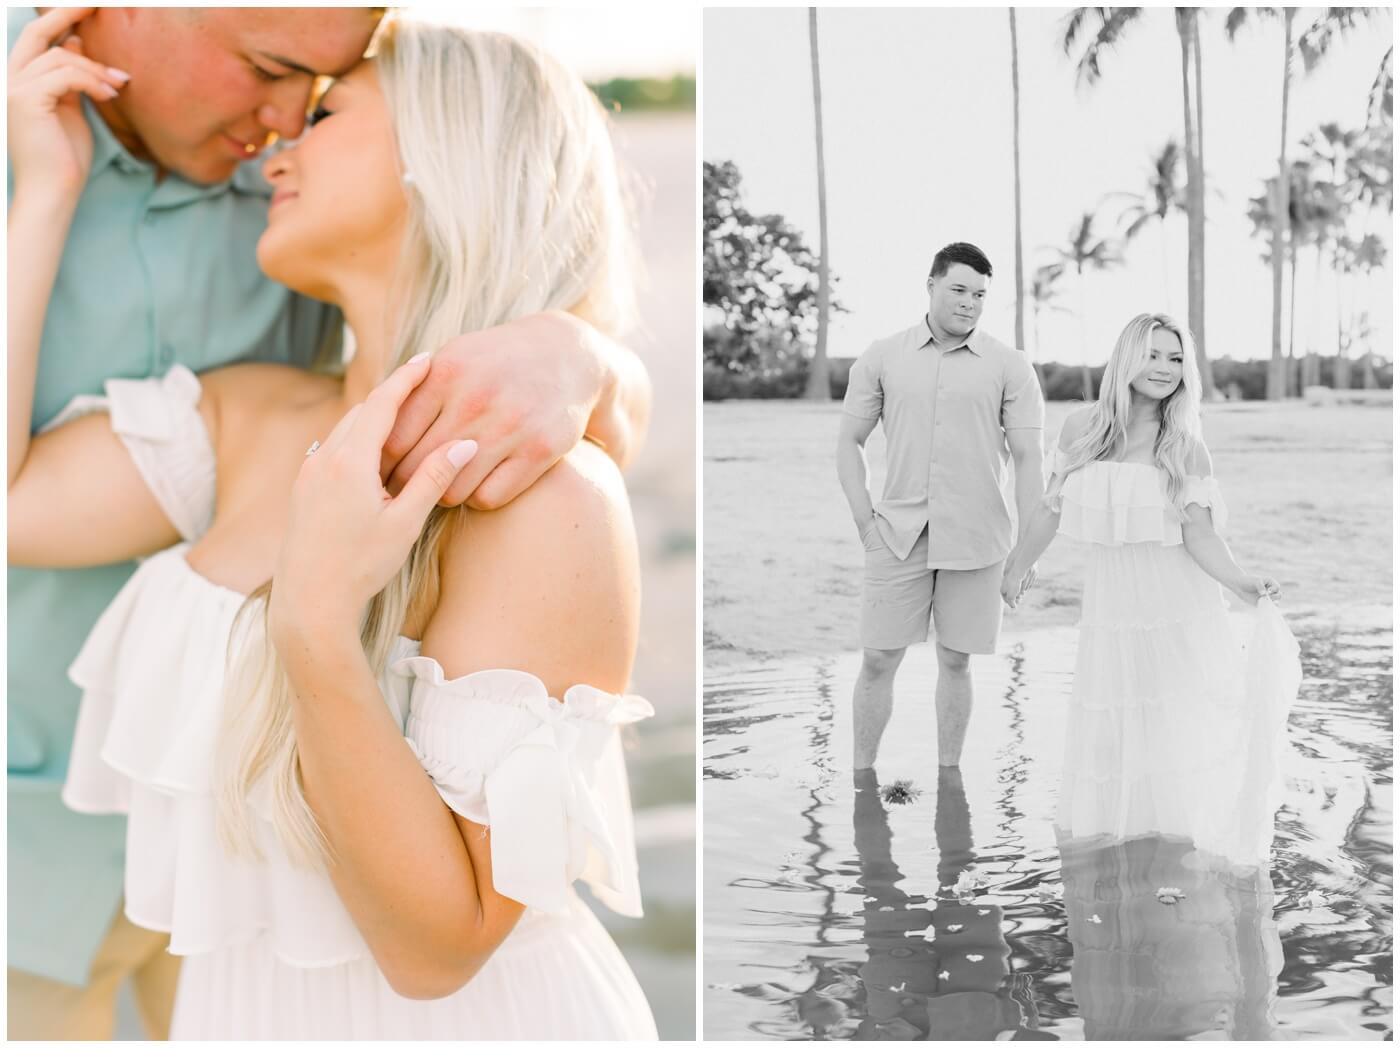 Wedding photographer in Miami | Couple smiles together on the beach